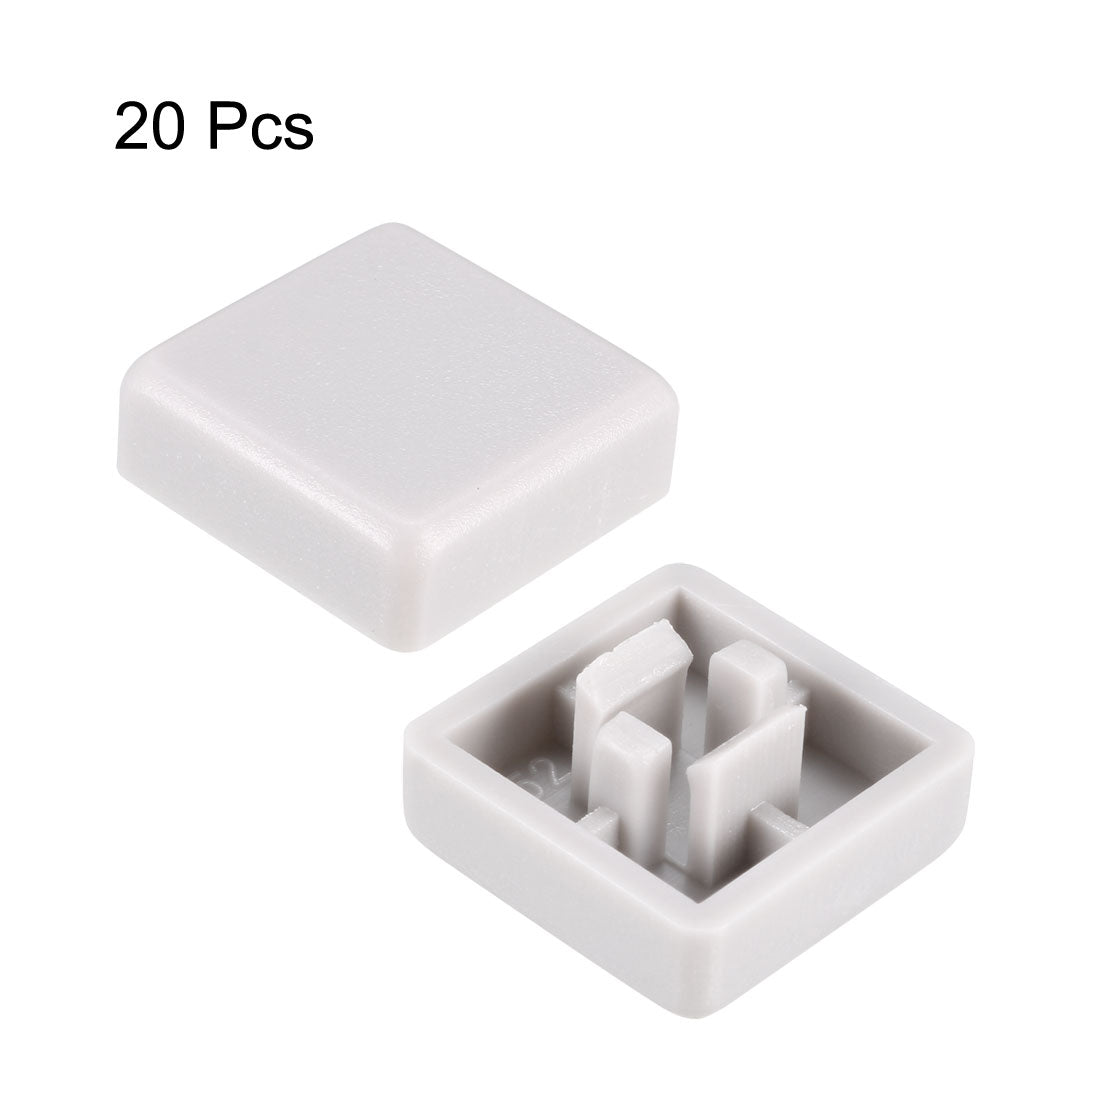 uxcell Uxcell 20Pcs Plastic 12x12mm Pushbutton Tactile Switch Caps Cover Keycaps Grey for 12x12x7.3mm Tact Switch